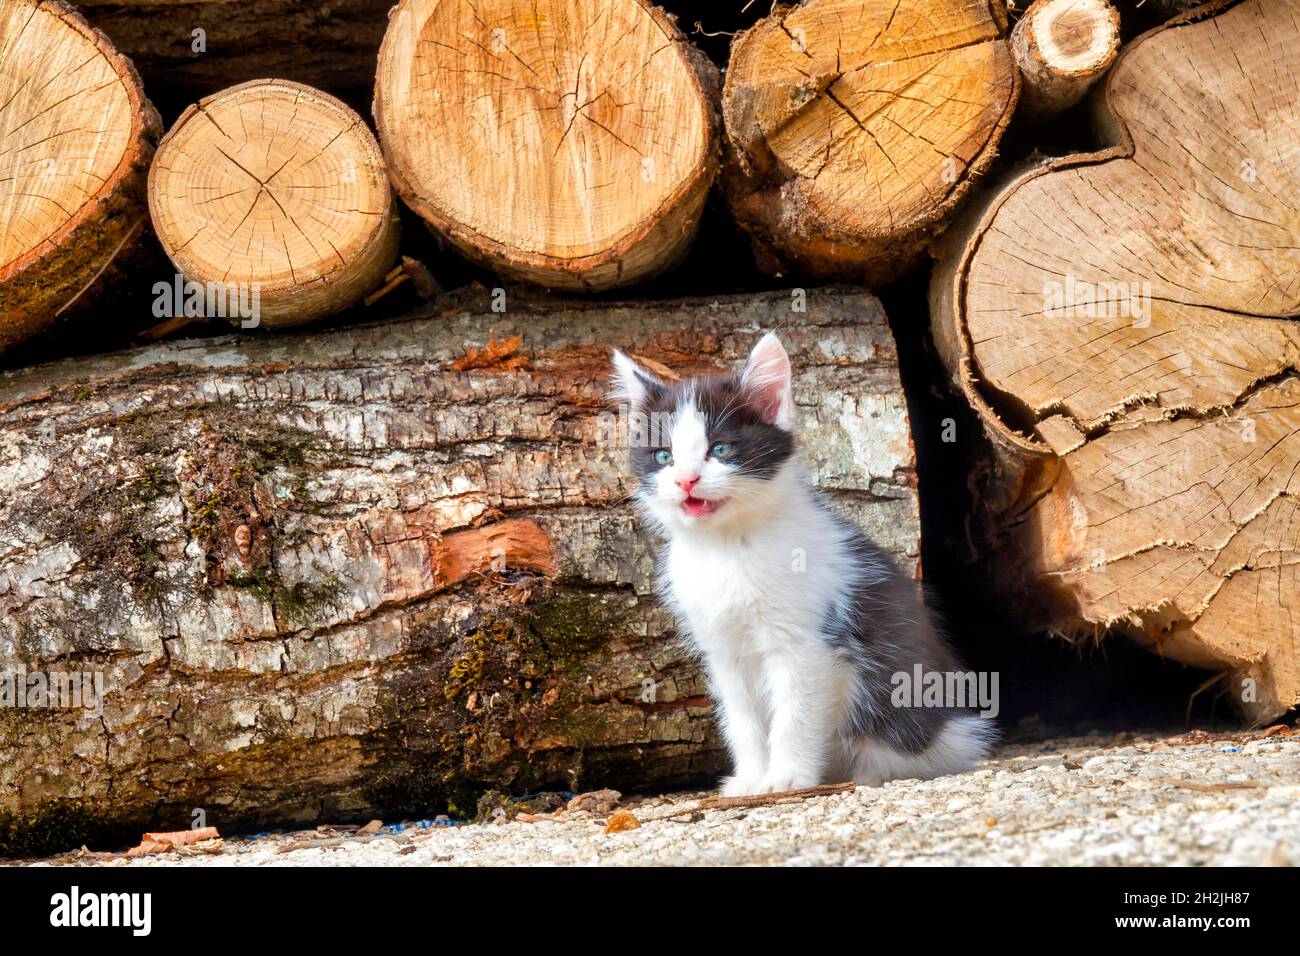 Kitten (Felis Catus) in front of a a pile of wood Stock Photo